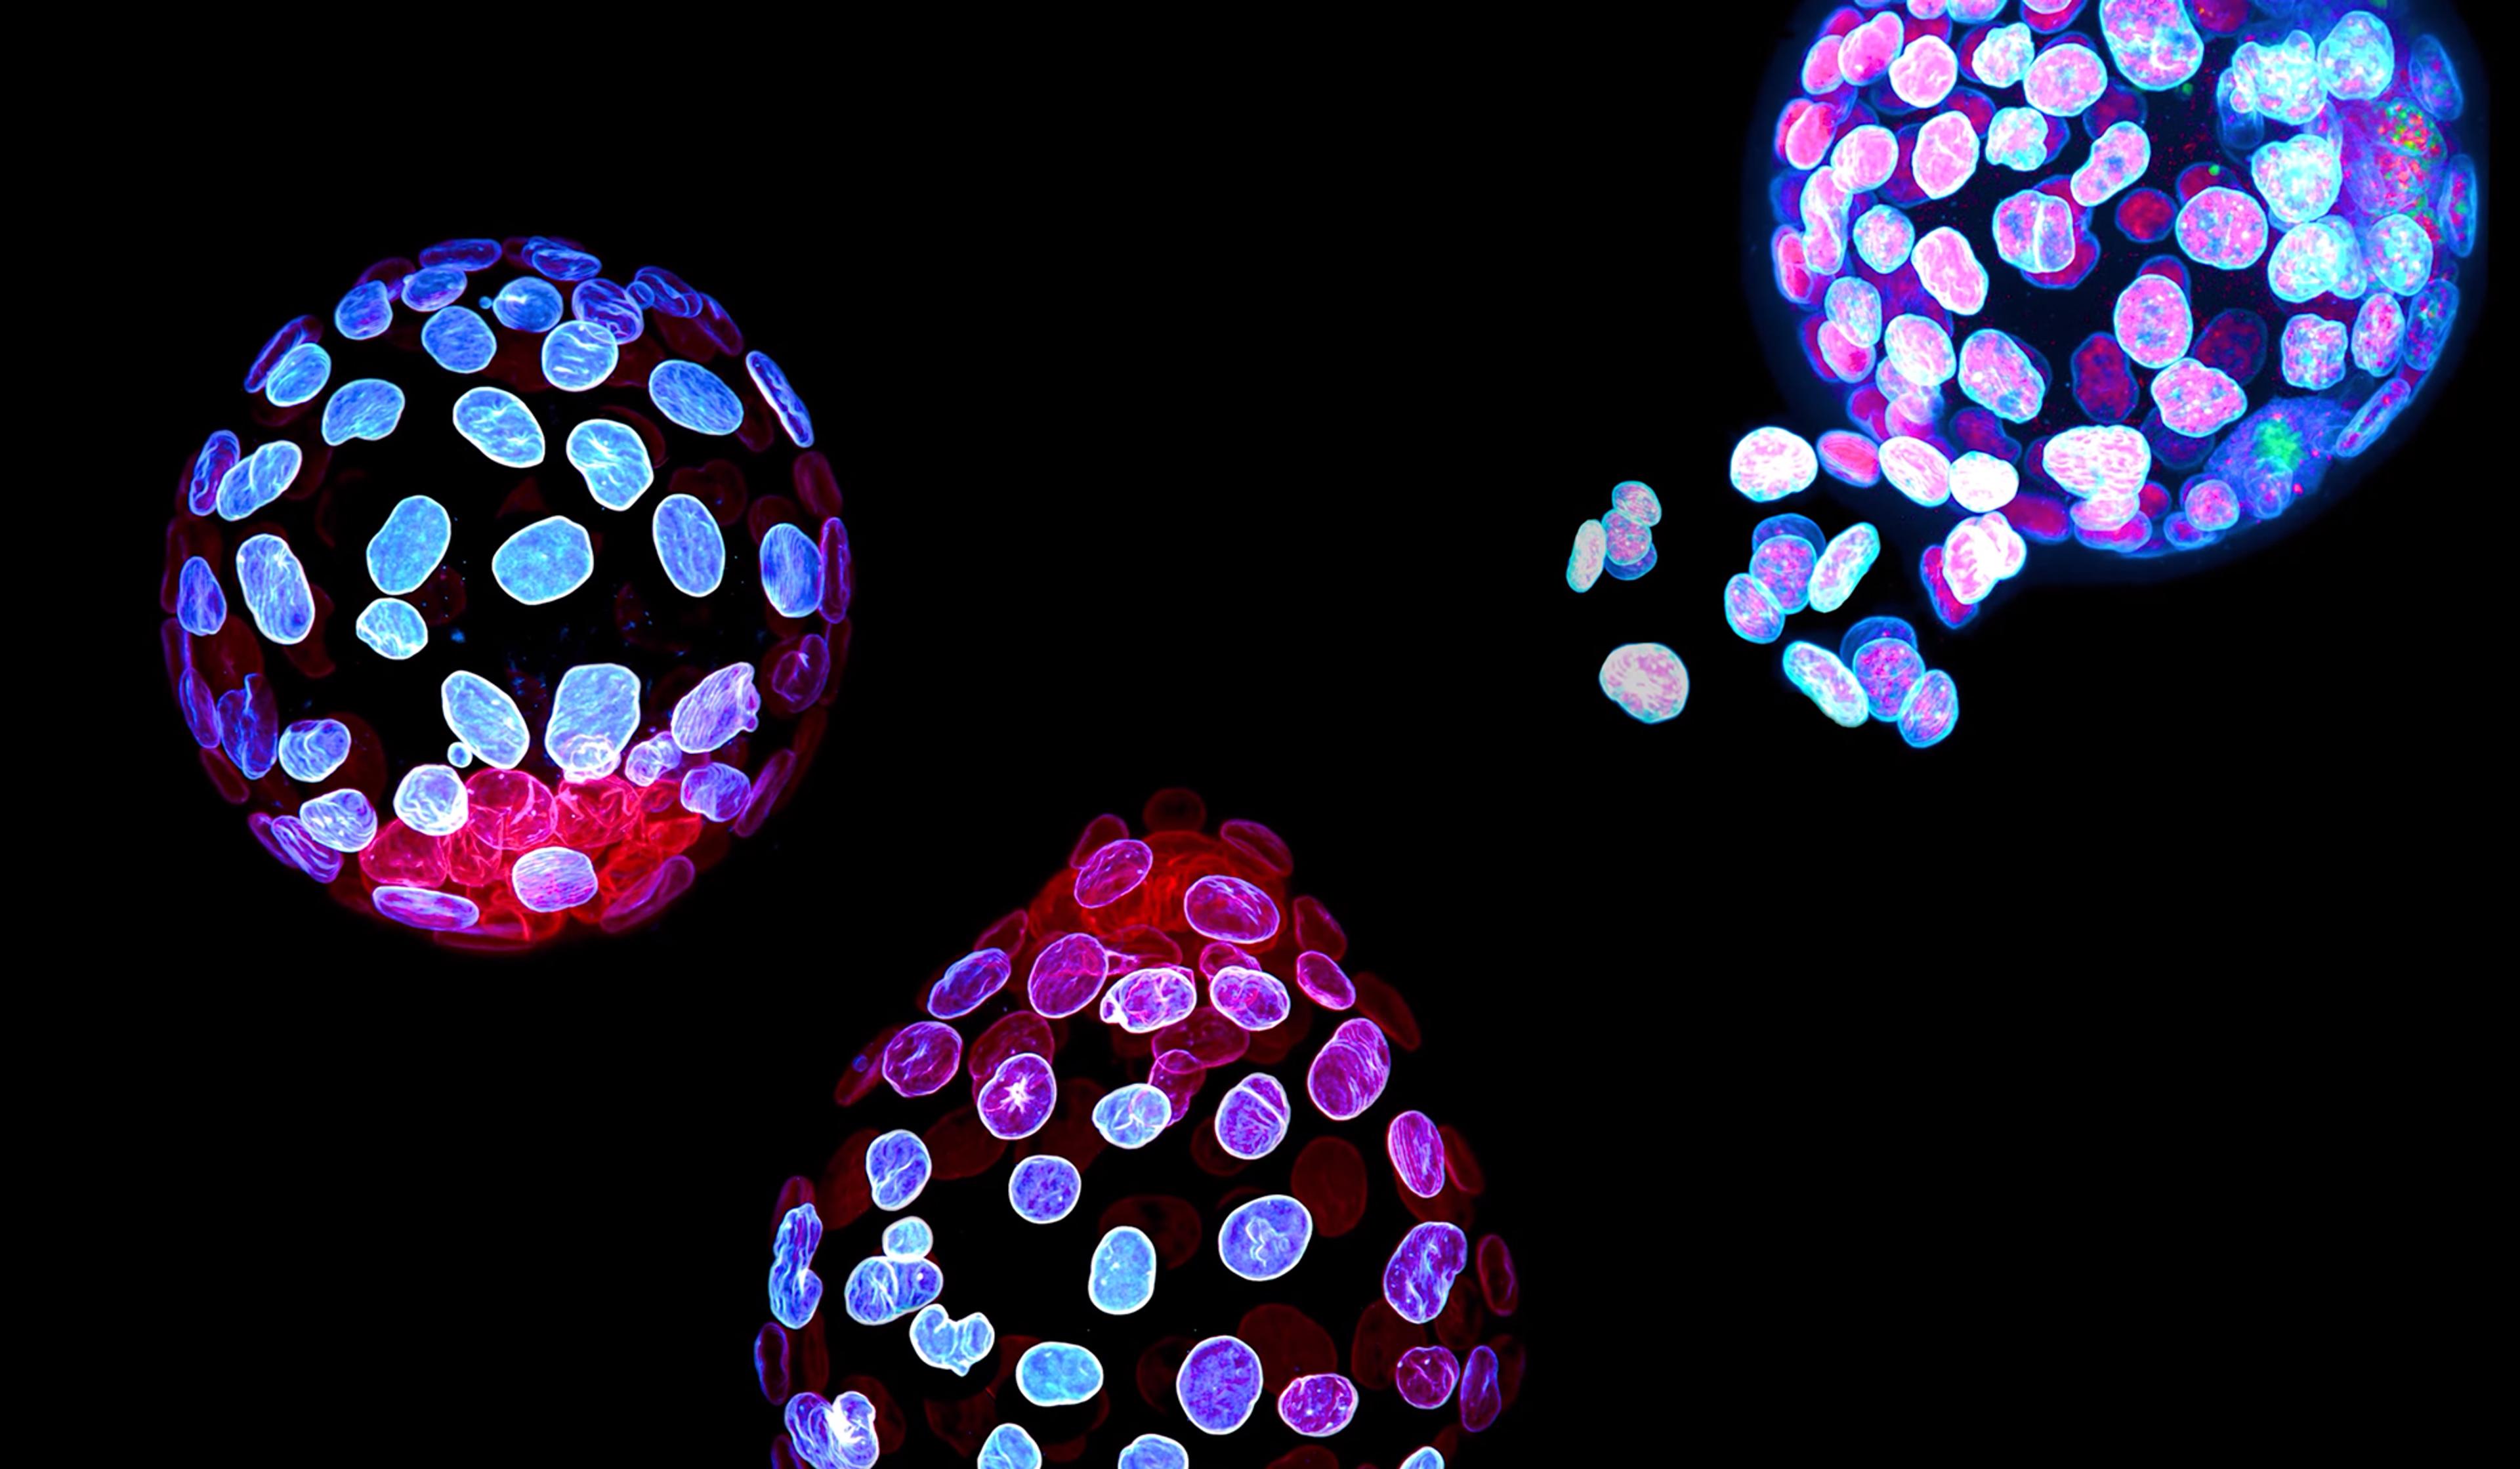 Three colourful cell spheres with glowing pink and blue nuclei on a black background, showing cellular structures in vibrant detail.